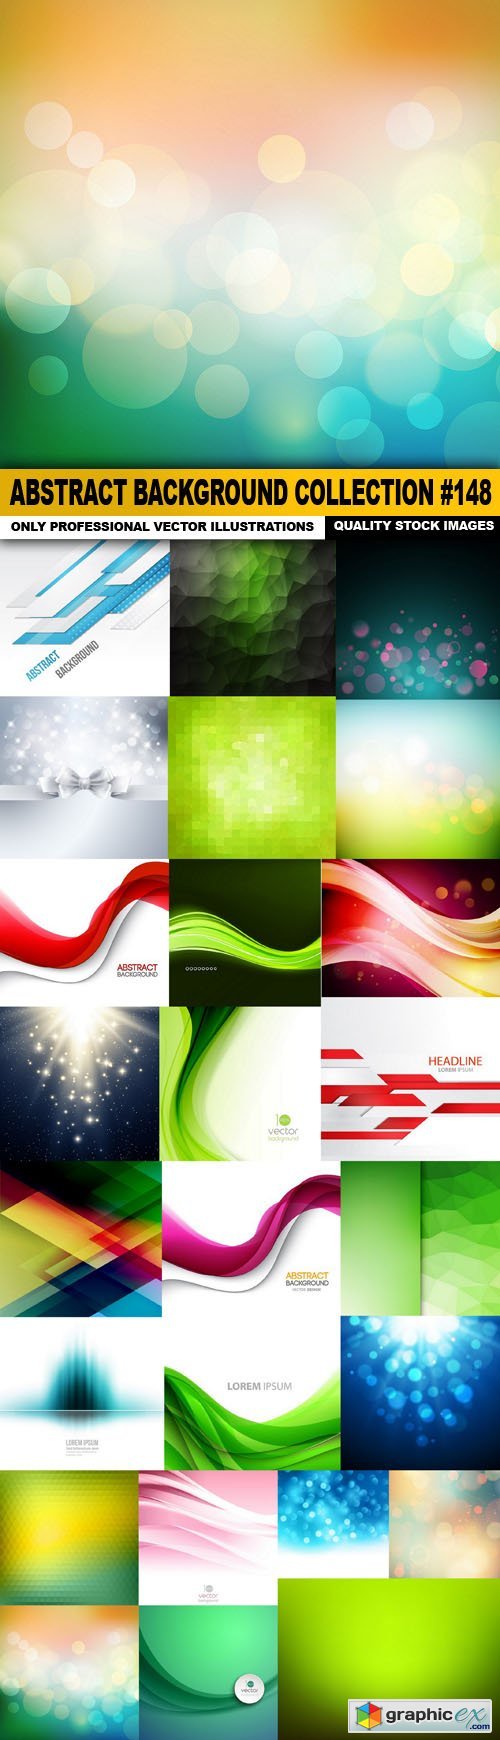 Abstract Background Collection #148